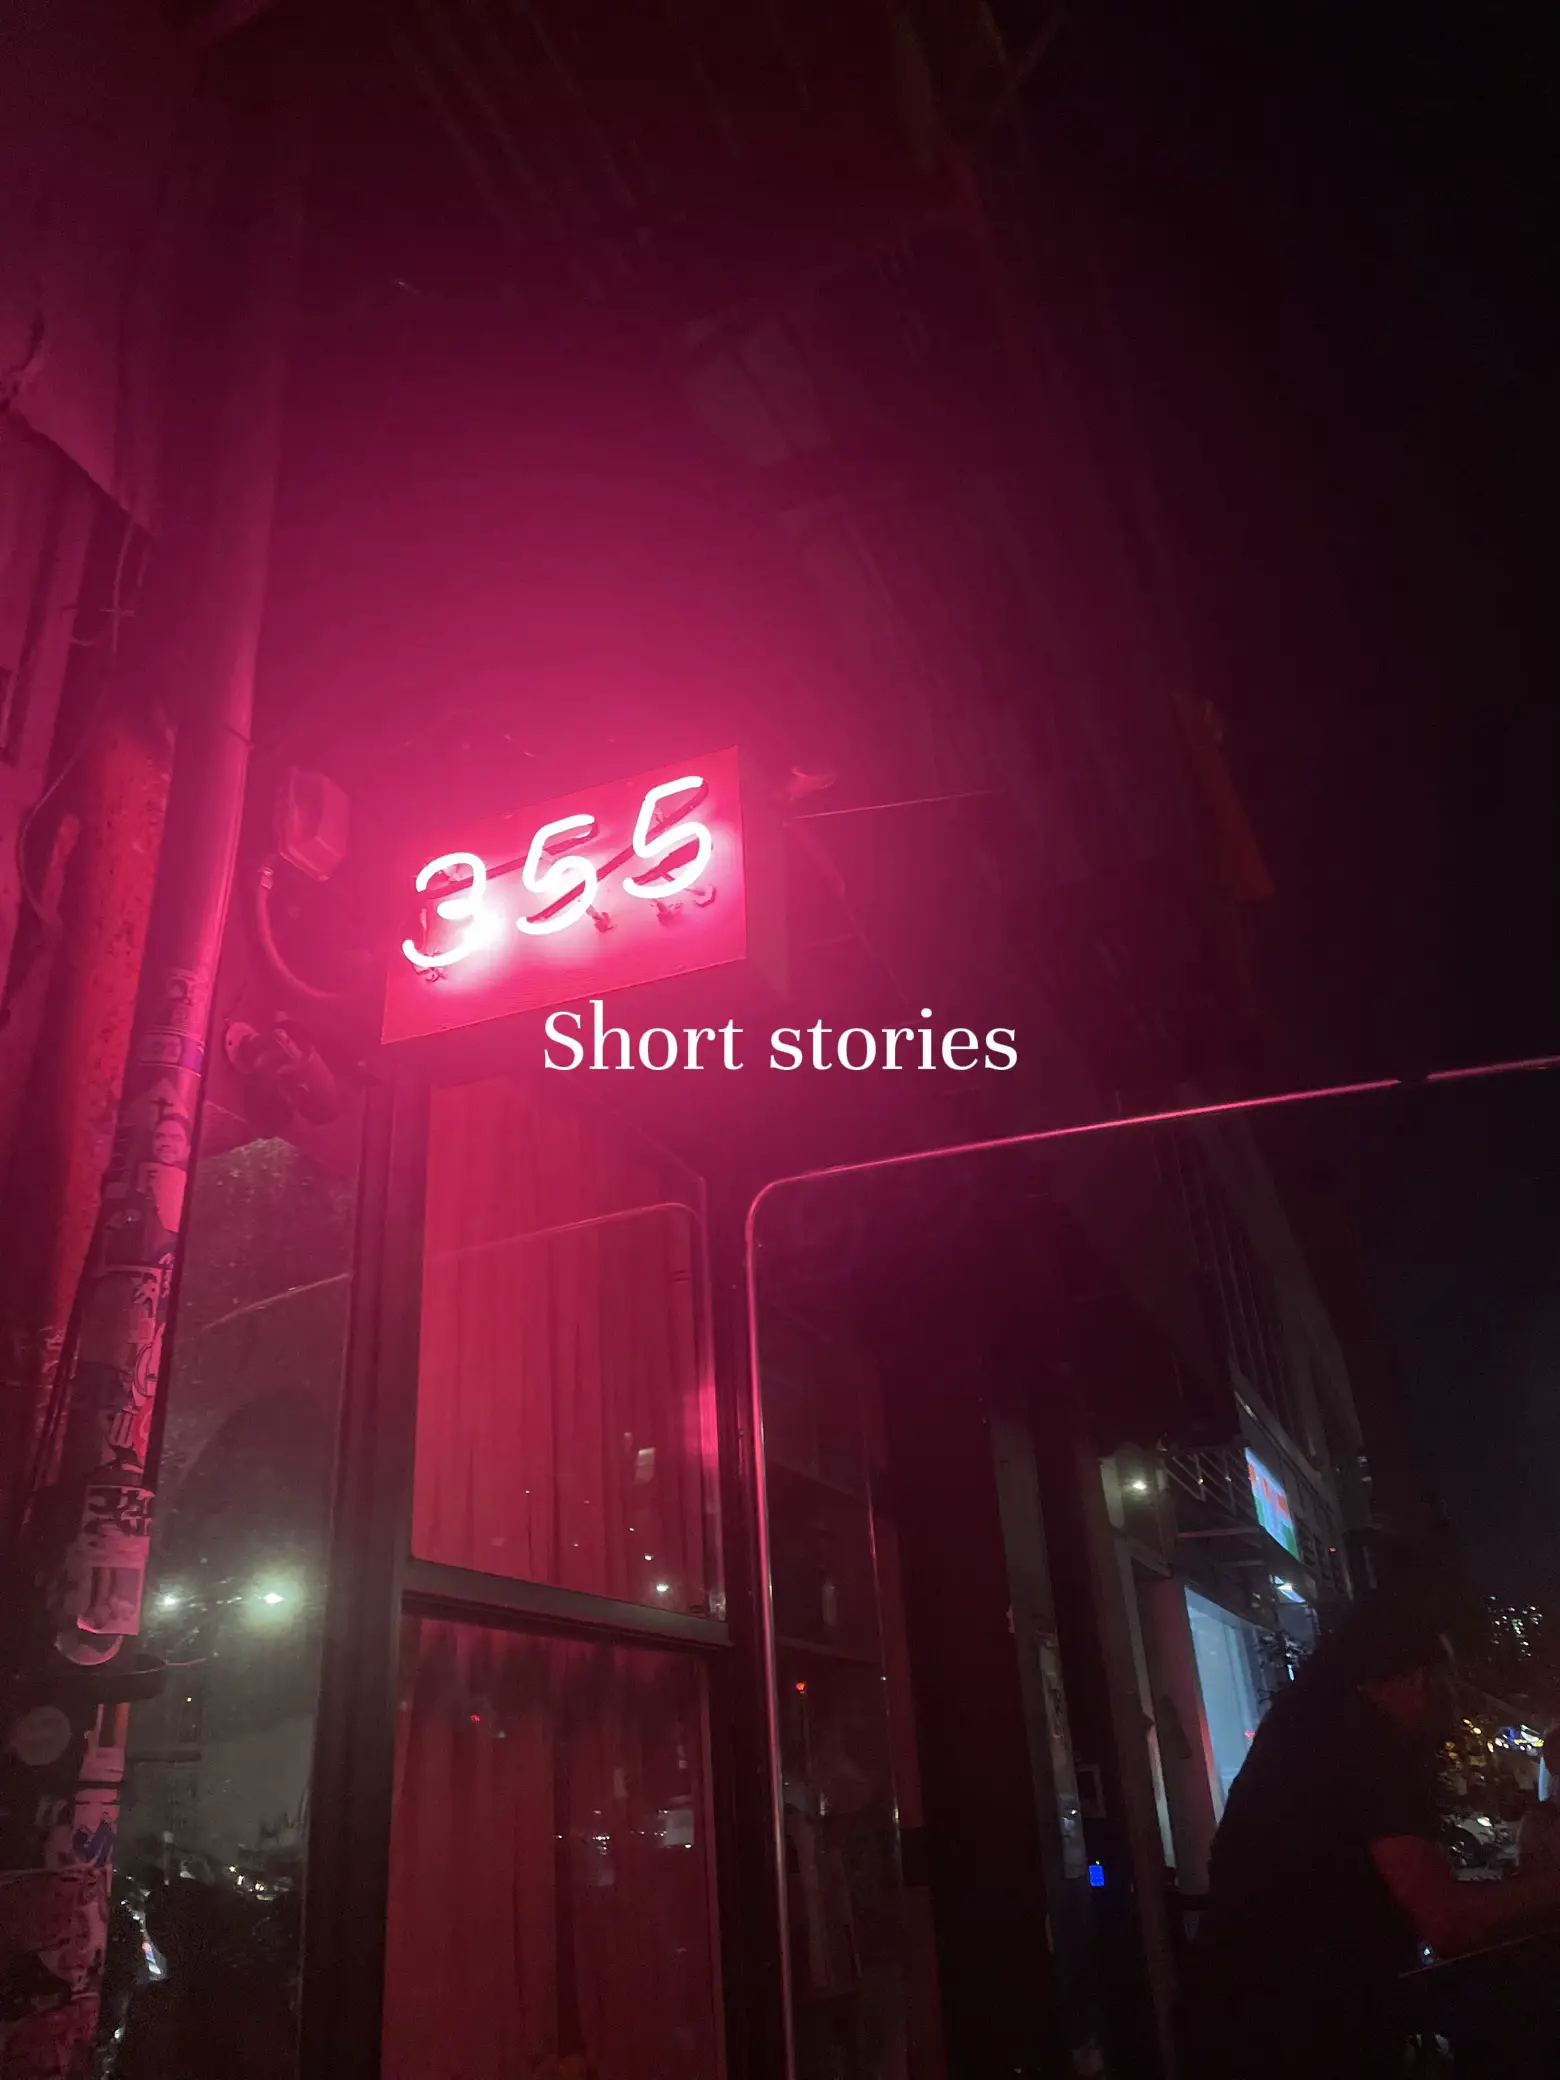  A neon sign with 355 Short stories.